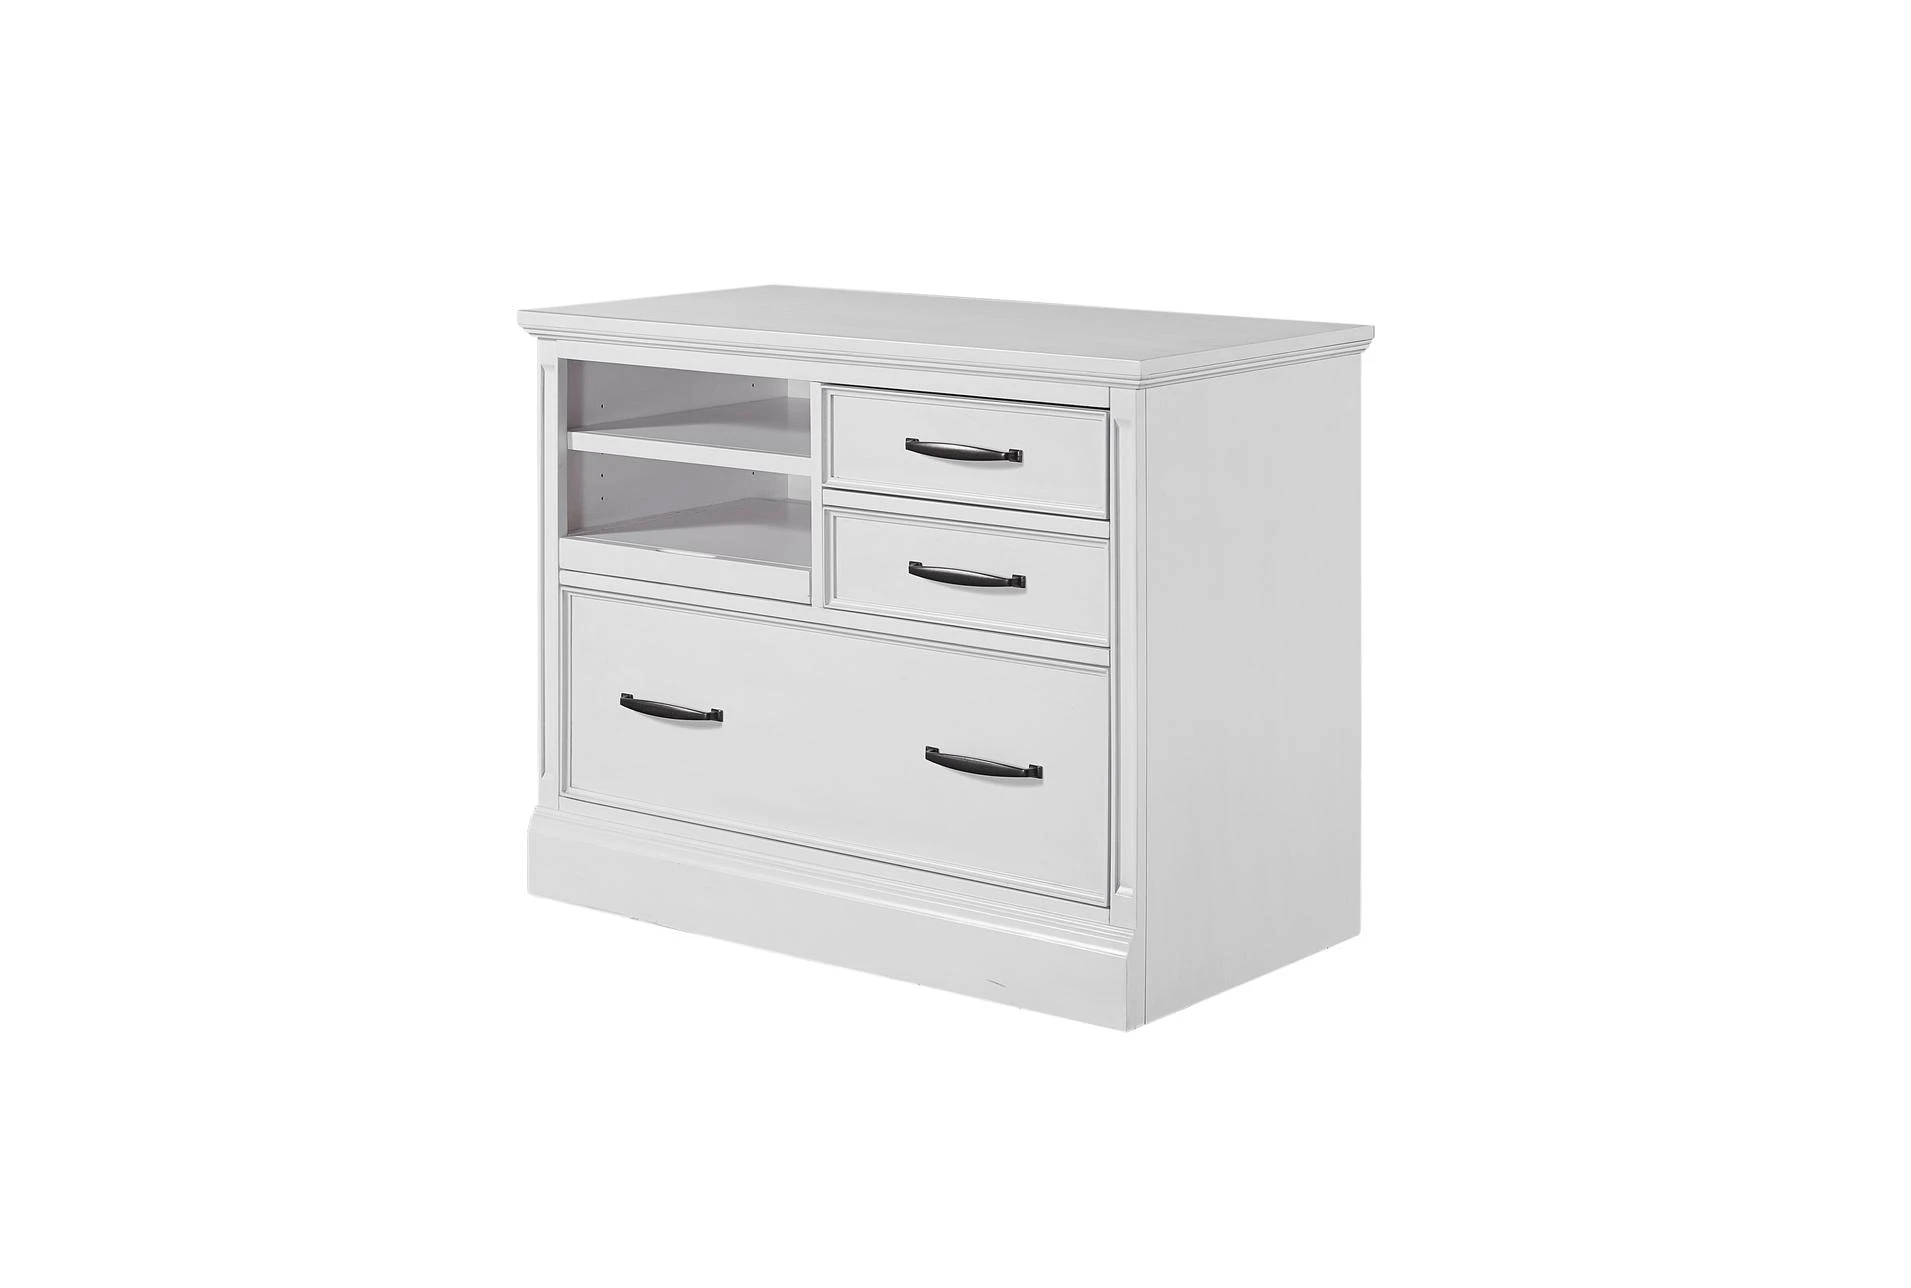 Cromwell White Functional Filing Cabinet | Living Spaces